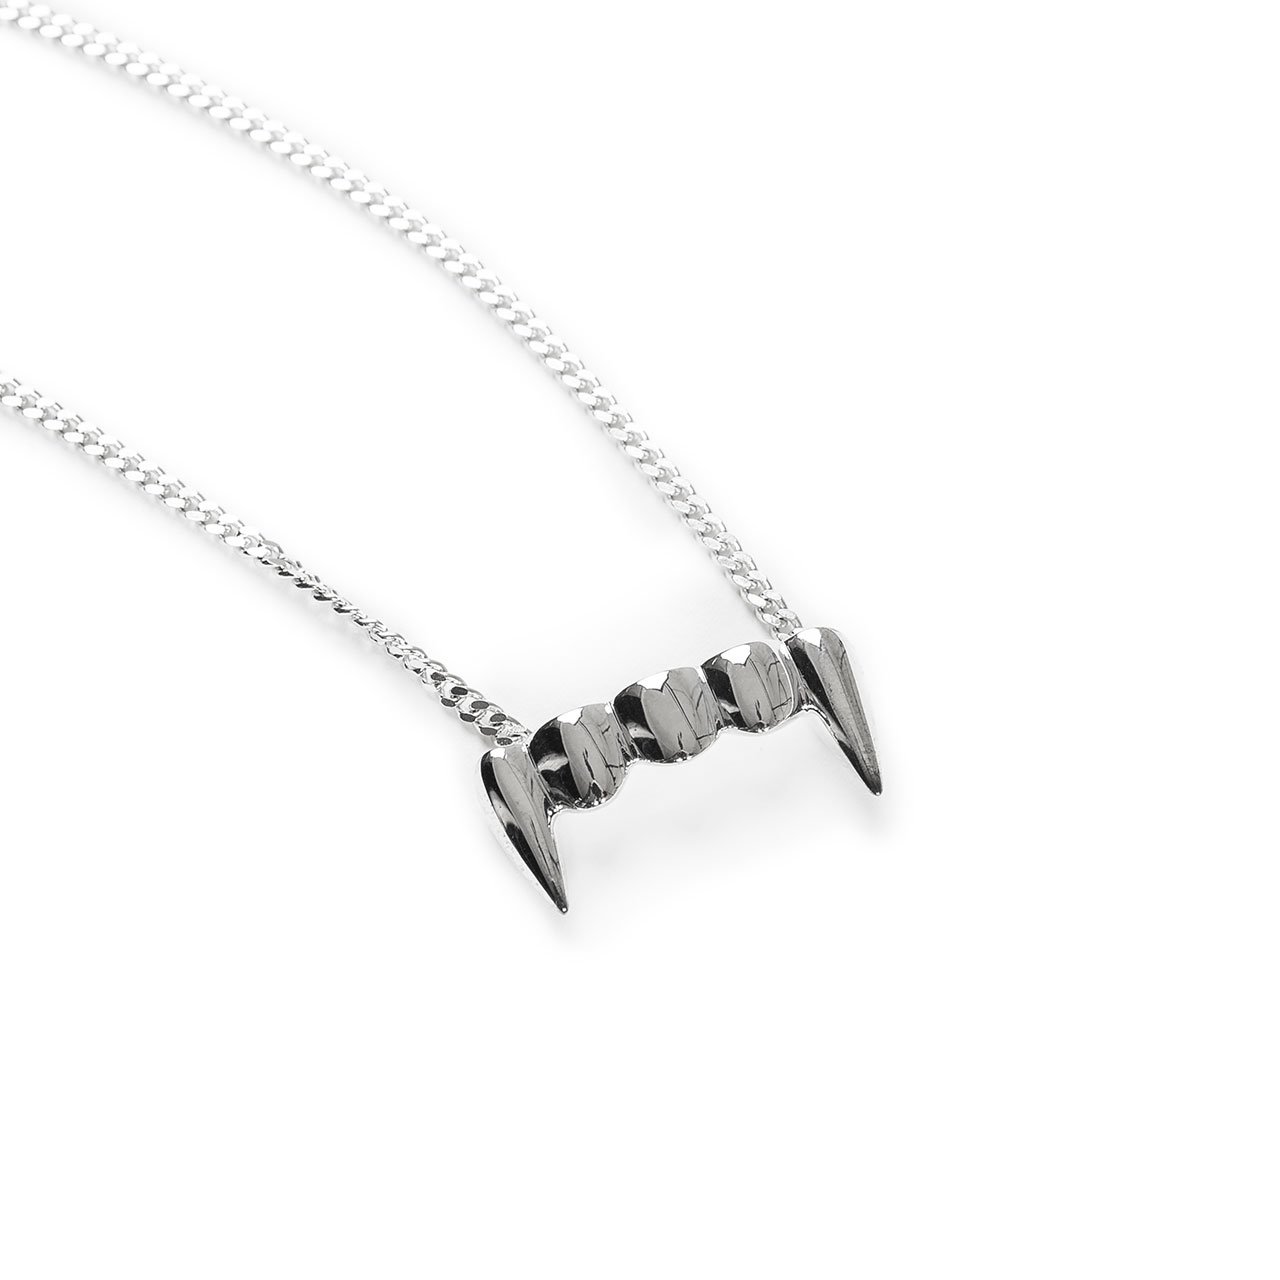 perks and mini s.loops original fang necklace (silver) - 9701-sv - a.plus - Image - 2